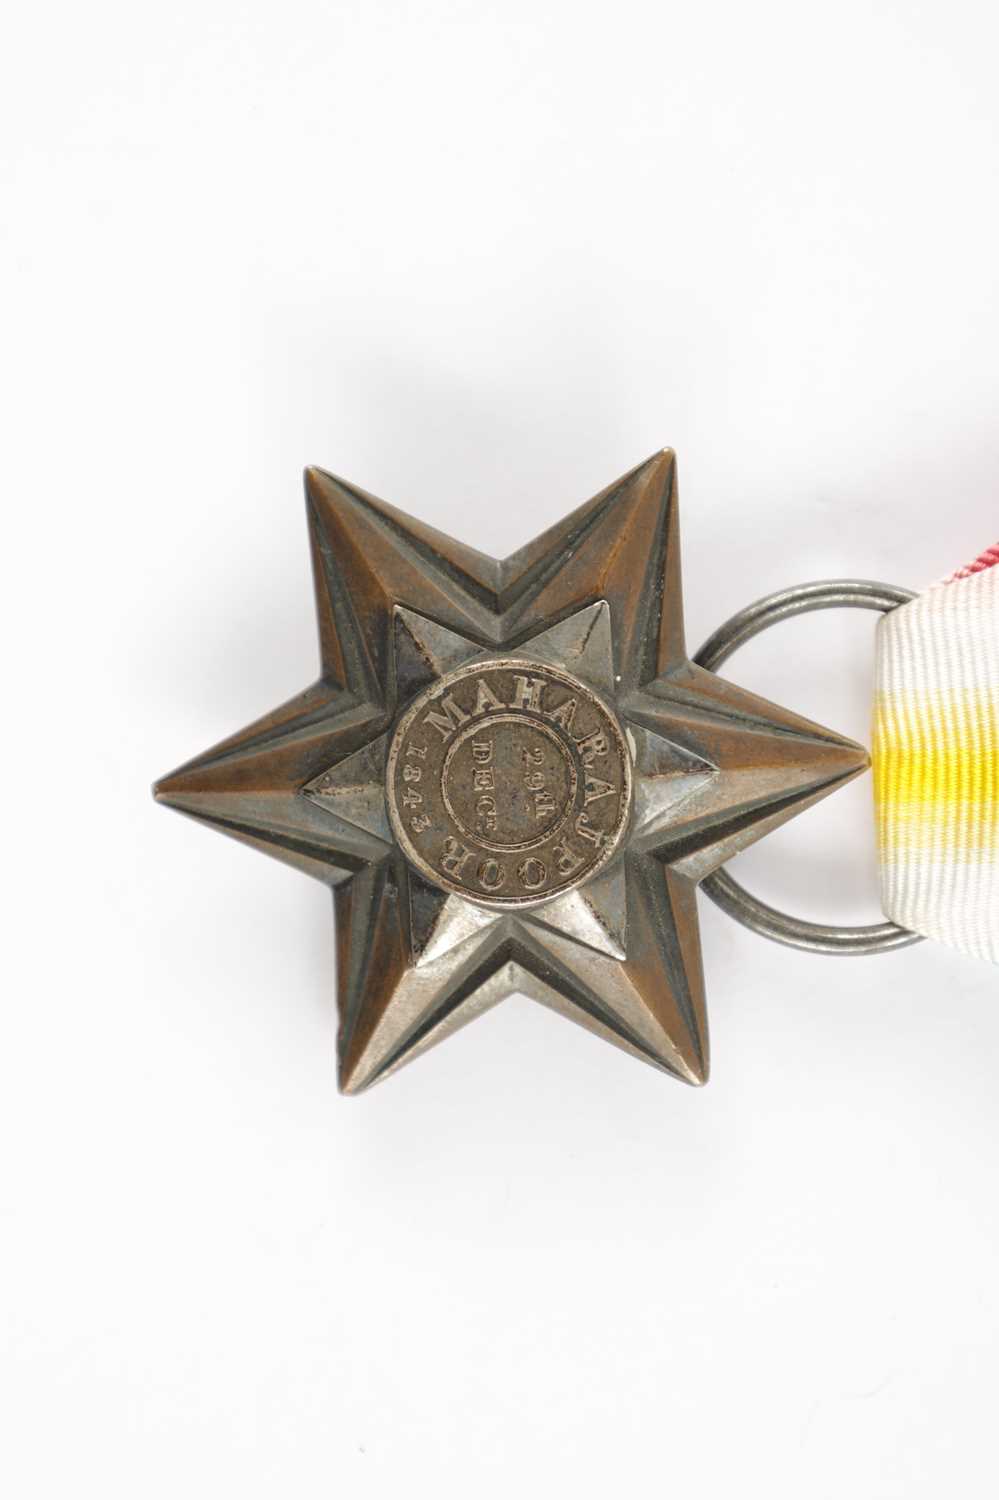 A GWALIOR STAR 1843 MEDAL - Image 2 of 3